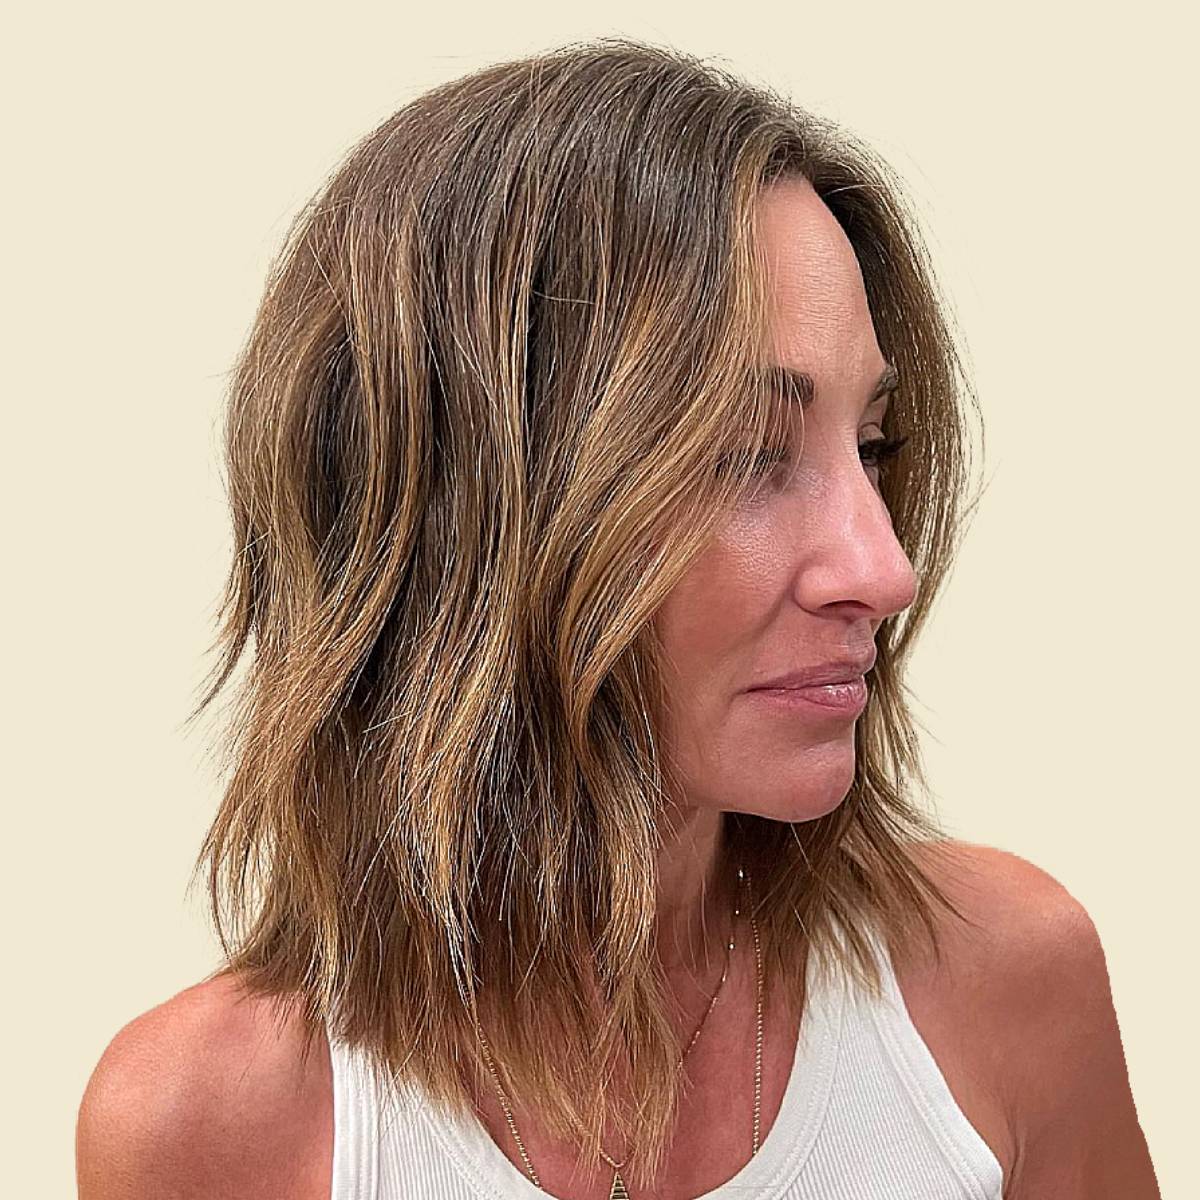 15 Must-Try Hairstyles for Women Over 40 - Best Hairstyles for Women Over 40